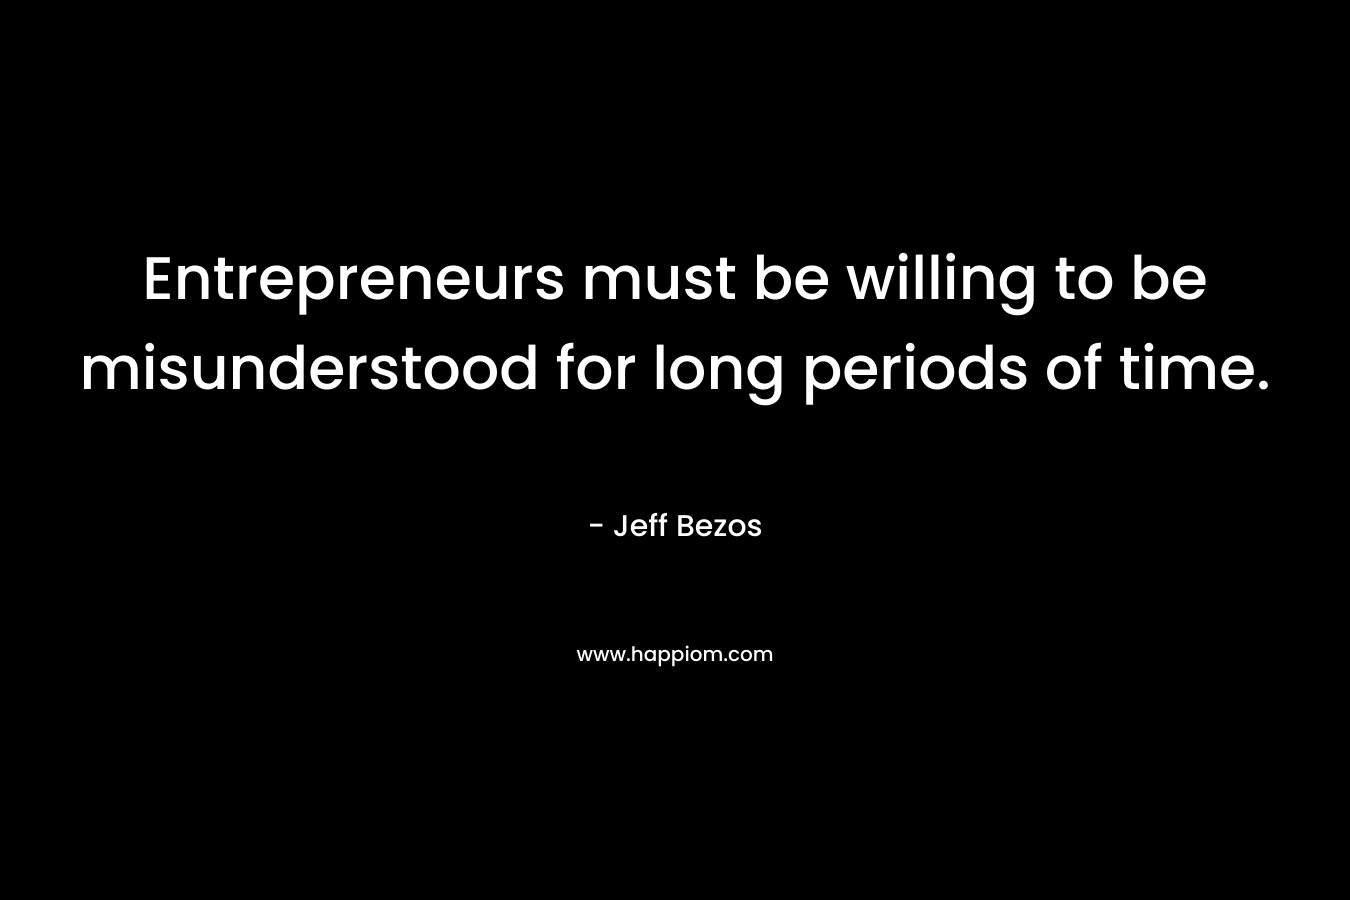 Entrepreneurs must be willing to be misunderstood for long periods of time. – Jeff Bezos